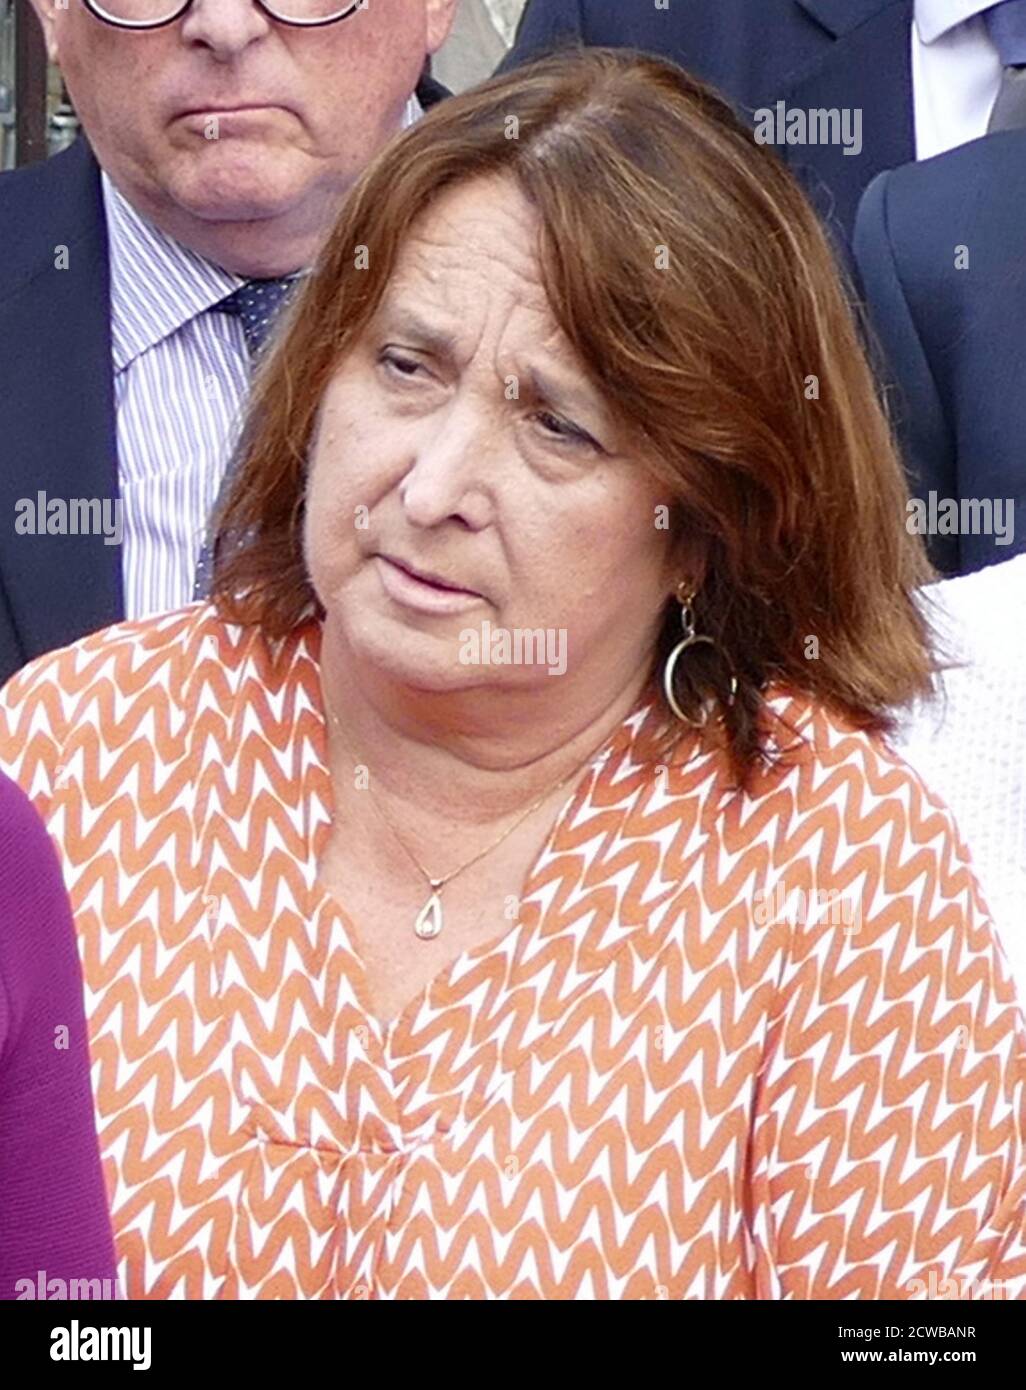 Christine Jardine arrives for media interviews after returning to parliament after the prorogation was annulled by the Supreme Court. 25th September 2019. Christine Jardine (born 1960), Scottish Liberal Democrat politician. She was elected as the Member of Parliament for Edinburgh West in 2017. Stock Photo